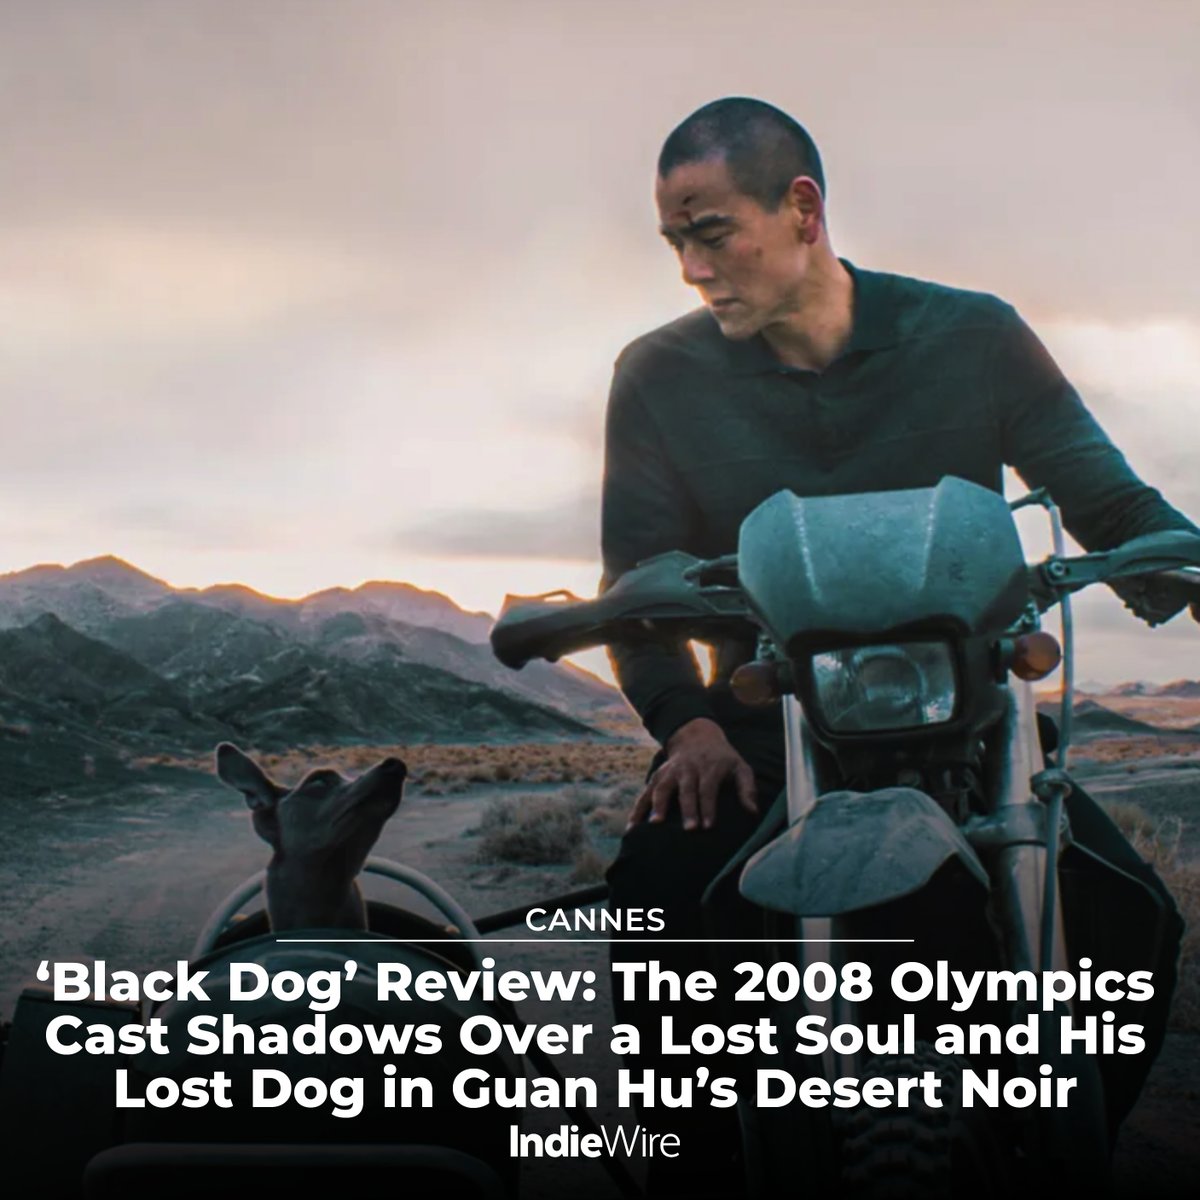 #Cannes: Eddie Peng stars as a social outcast who bonds with an allegedly rabid dog in a pulpy redemption story set in the desert outskirts of Beijing. Read our interview for 'Black Dog' here: trib.al/CAQEs7N